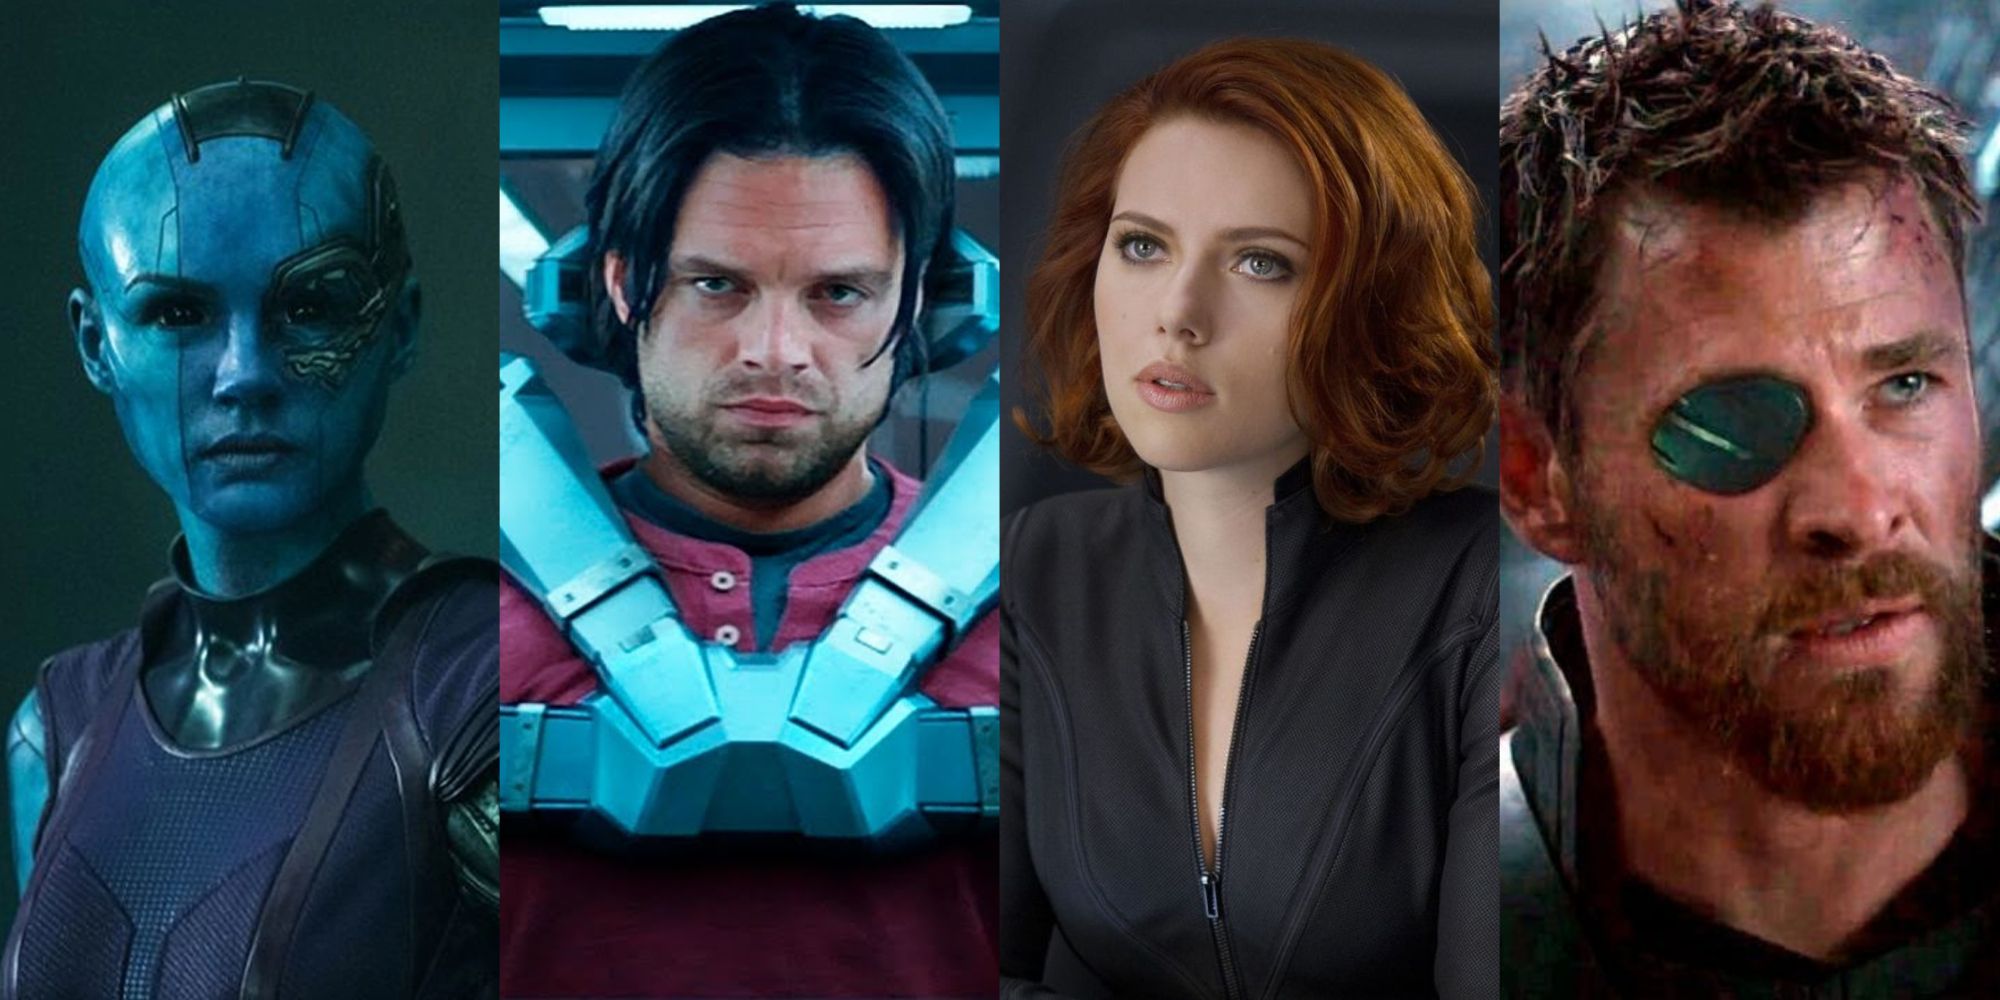 A split image of Nebula, Bucky, Natasha, and Thor from the MCU is shown.